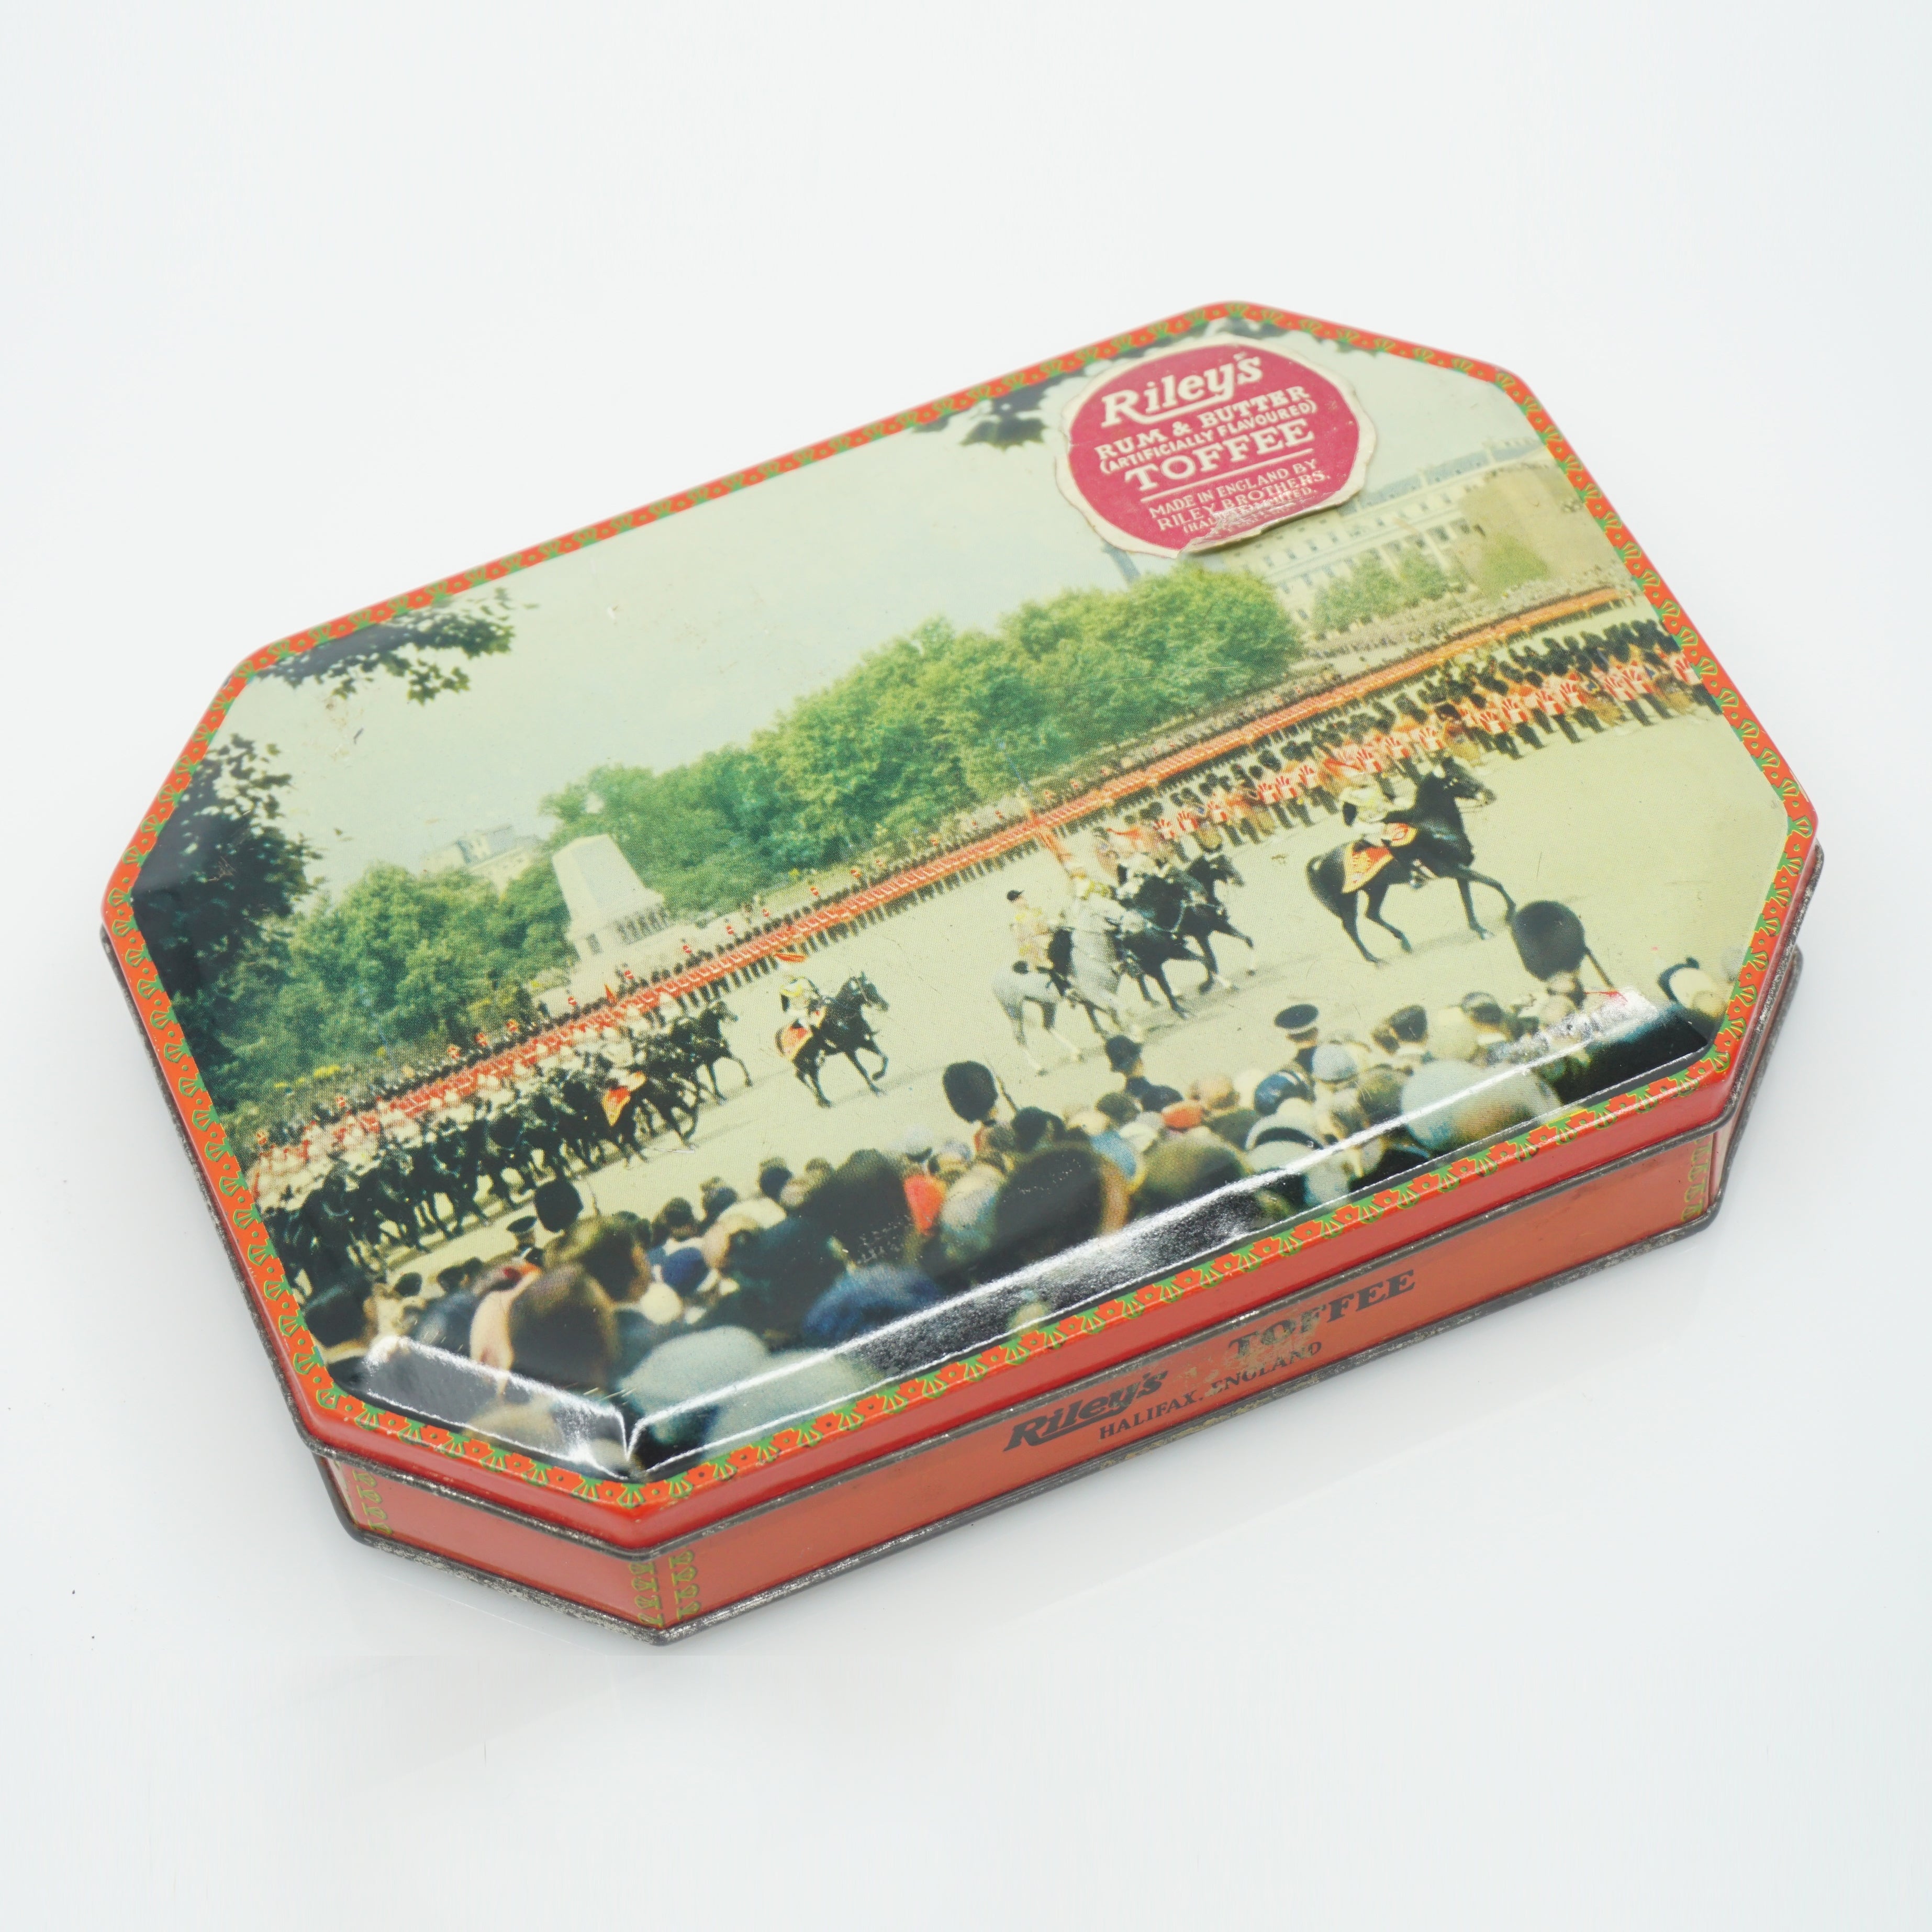 Vintage Riley's Toffee Tin Litho Container. Orange Sides, Horse Parade Scene Lid. 7" Wide.